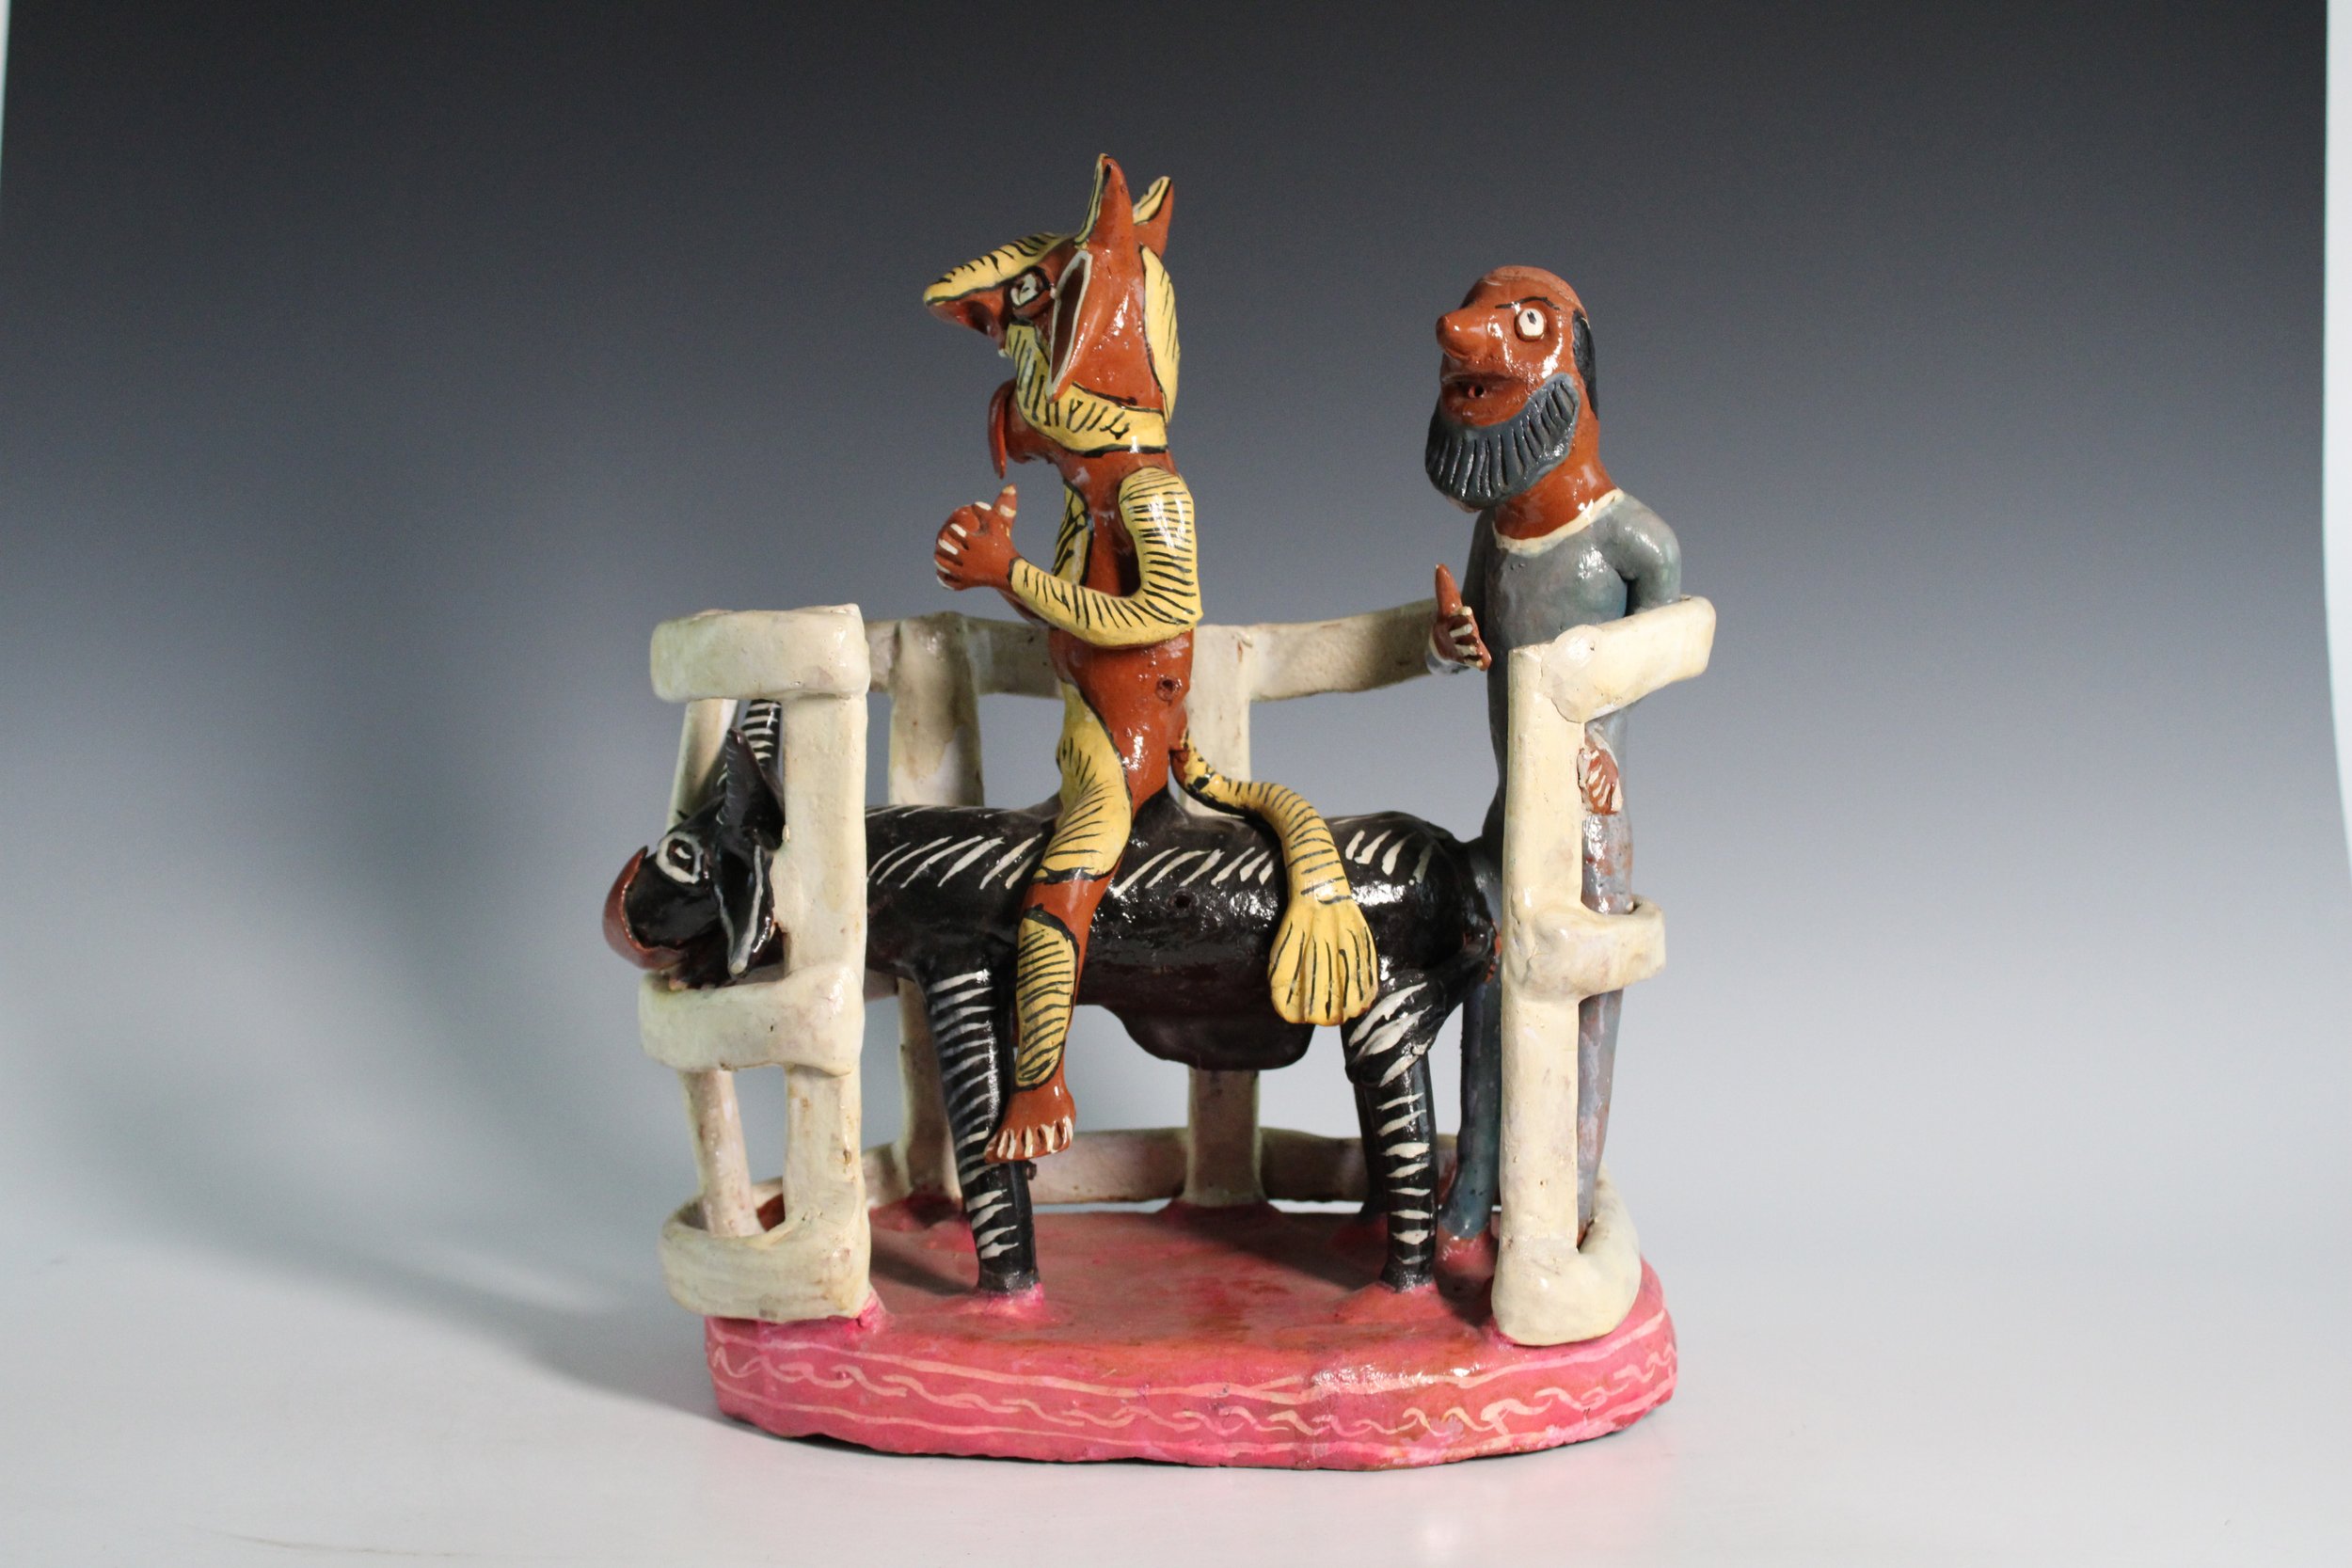 Mexican Folk Art Polychrome Earthenware Sculpture Featuring the Devil Riding a Bull, 20th Century